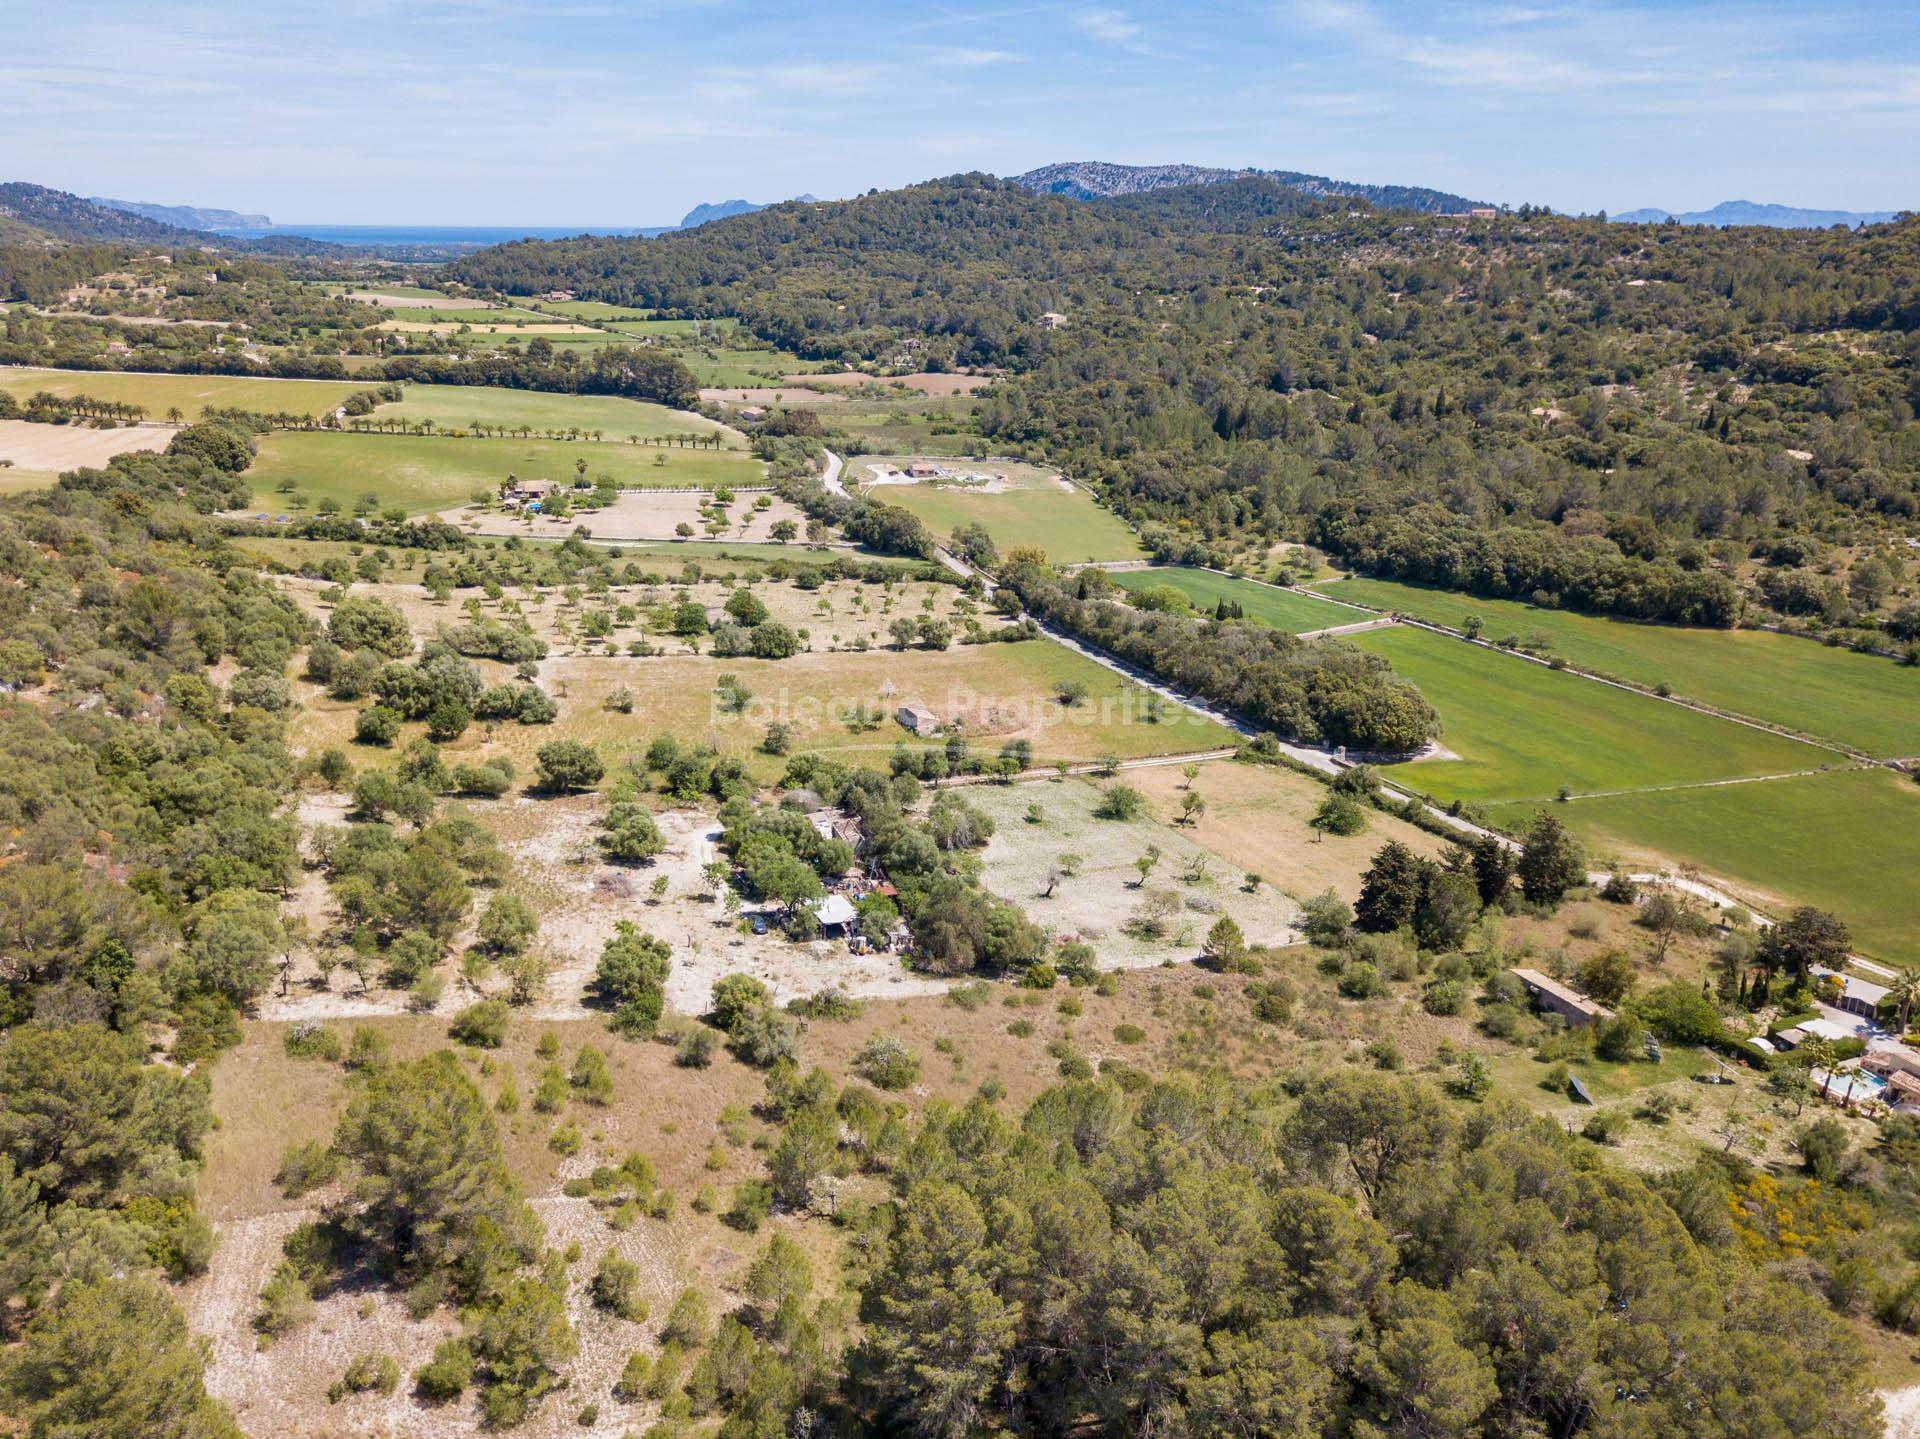 Rustic finca for sale in a peaceful valley near the town of Campanet, Mallorca